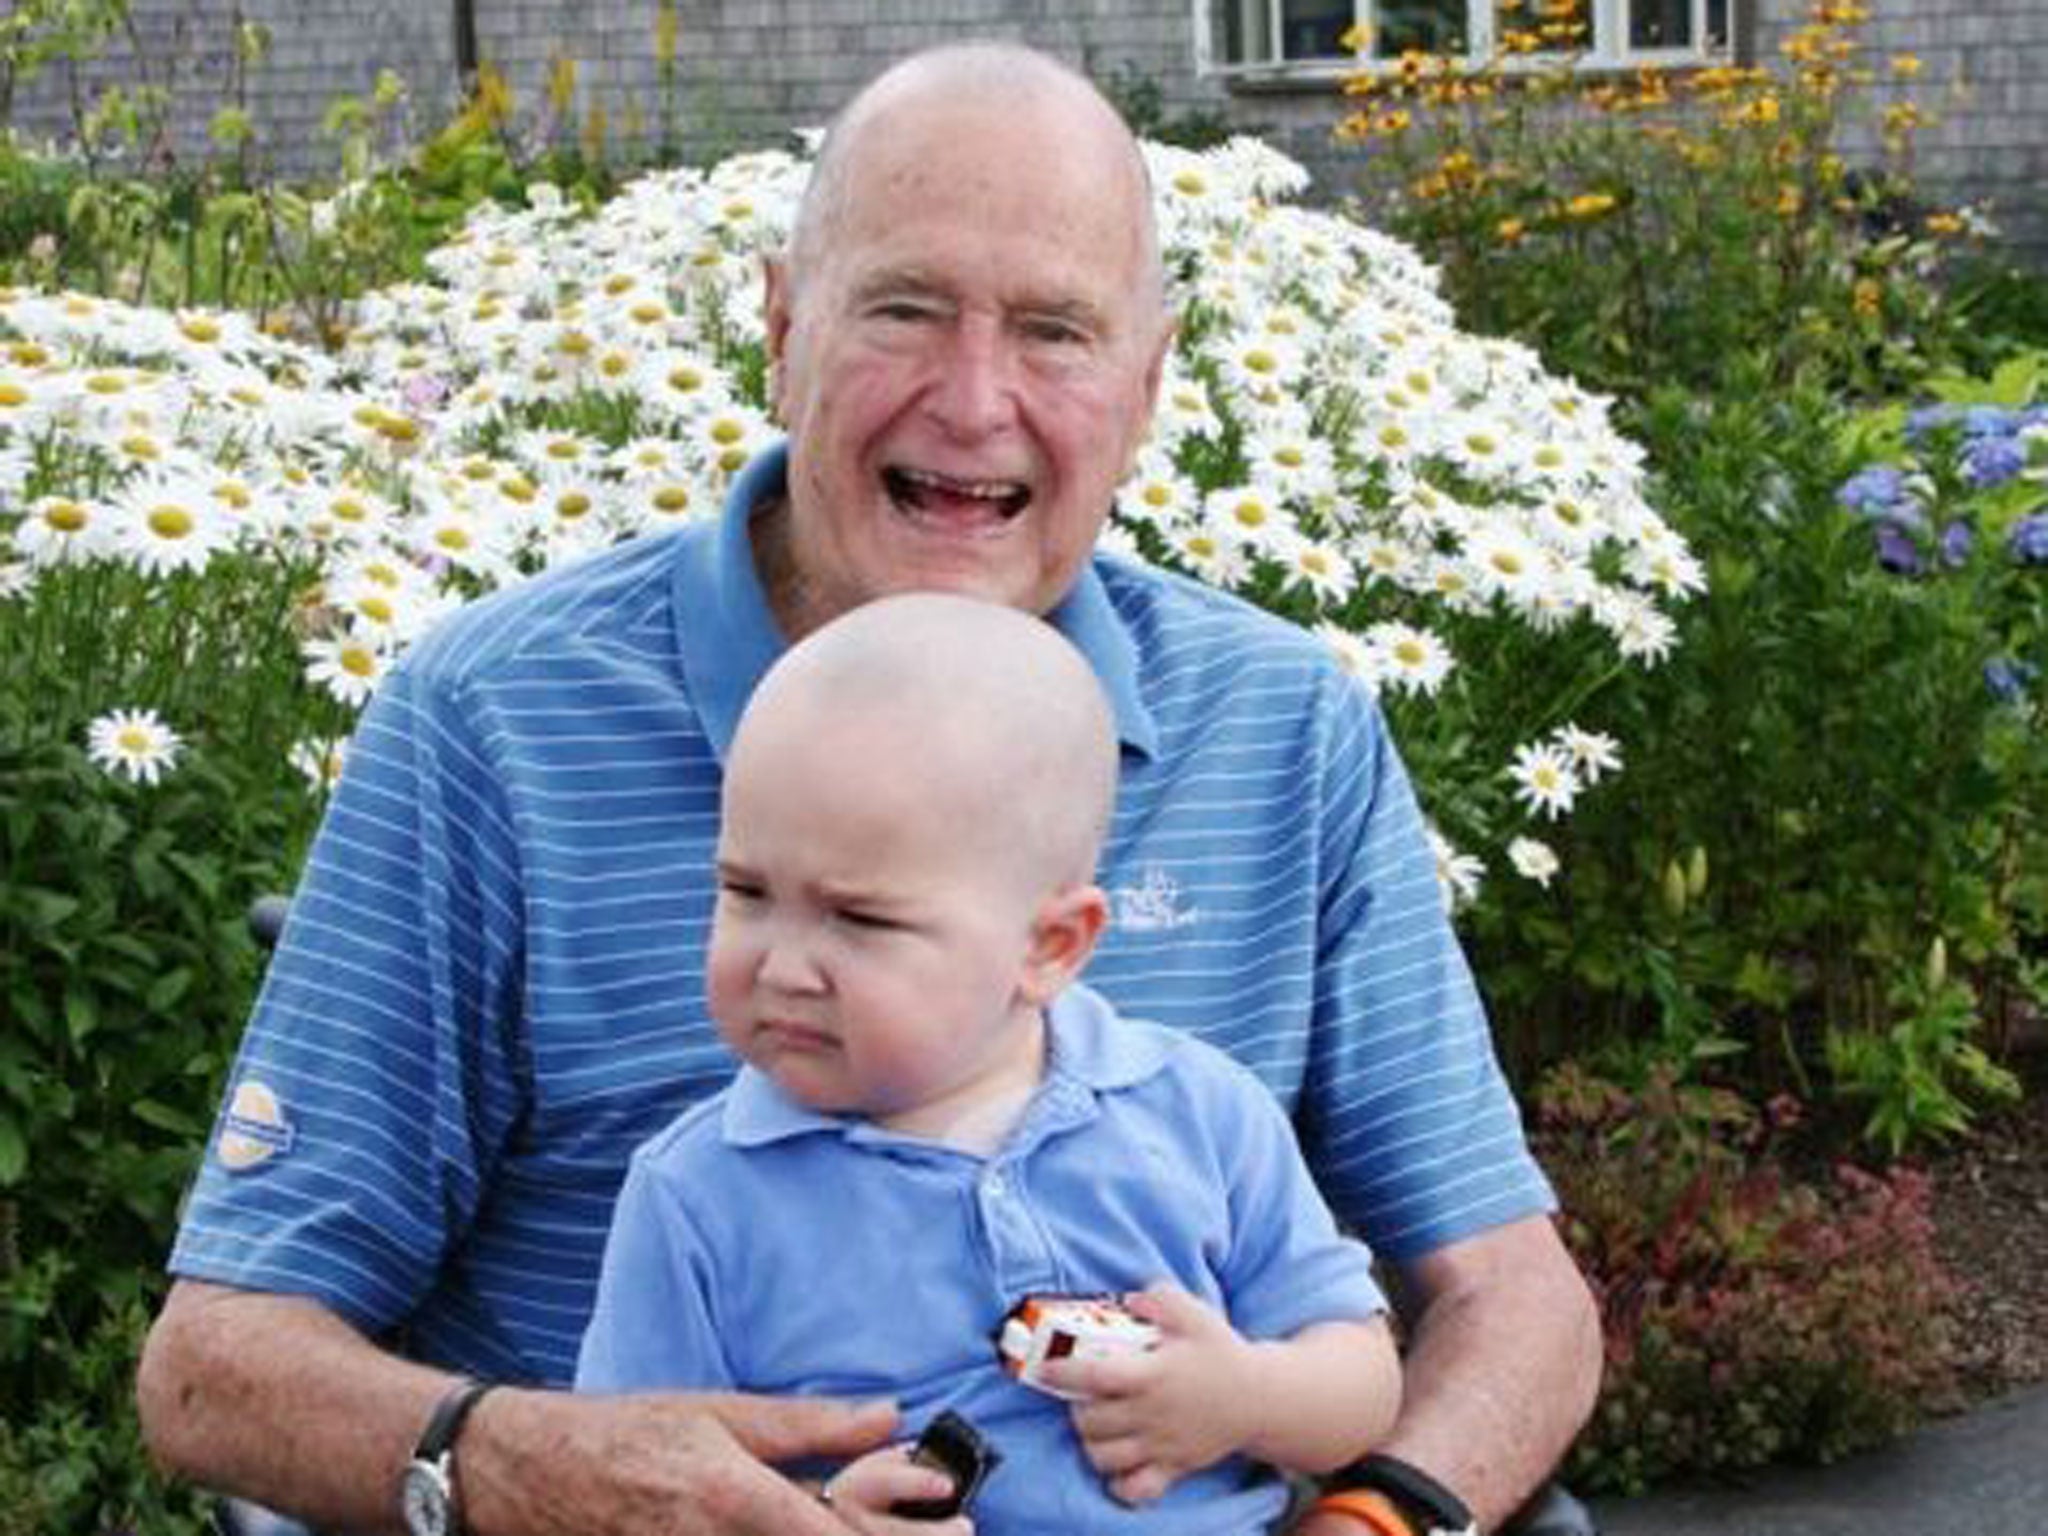 President George Bush Senior has shaved his head to support a young child with leukaemia